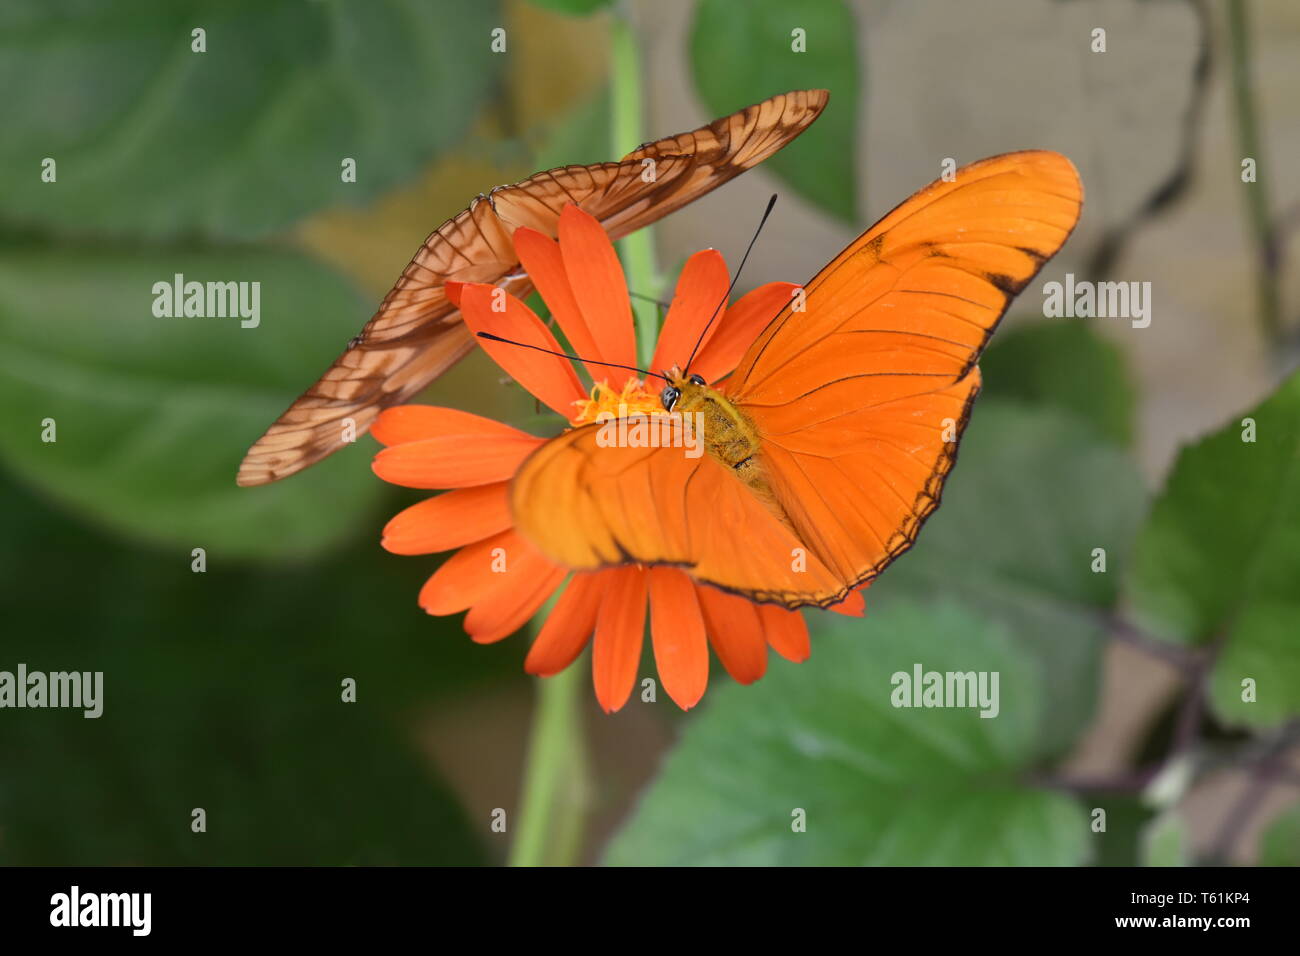 Orange colored Julia heliconian butterfly Dryas iulia feeding on a flower Stock Photo